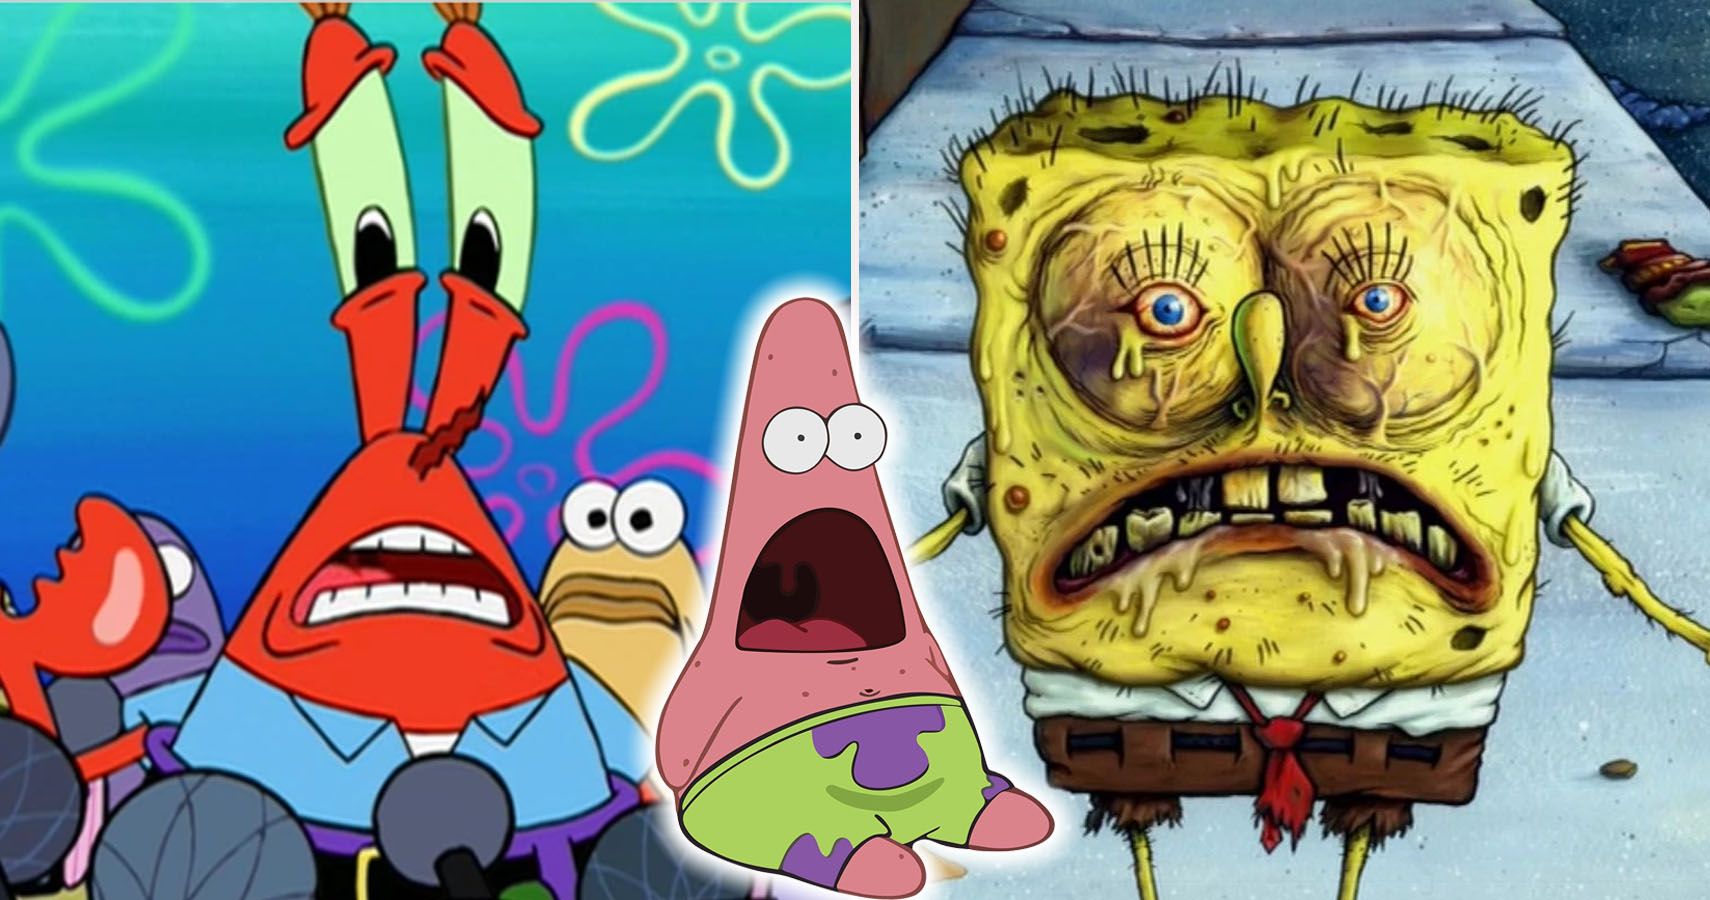 15 Awesome Things You Didn’t Know About SpongeBob SquarePants